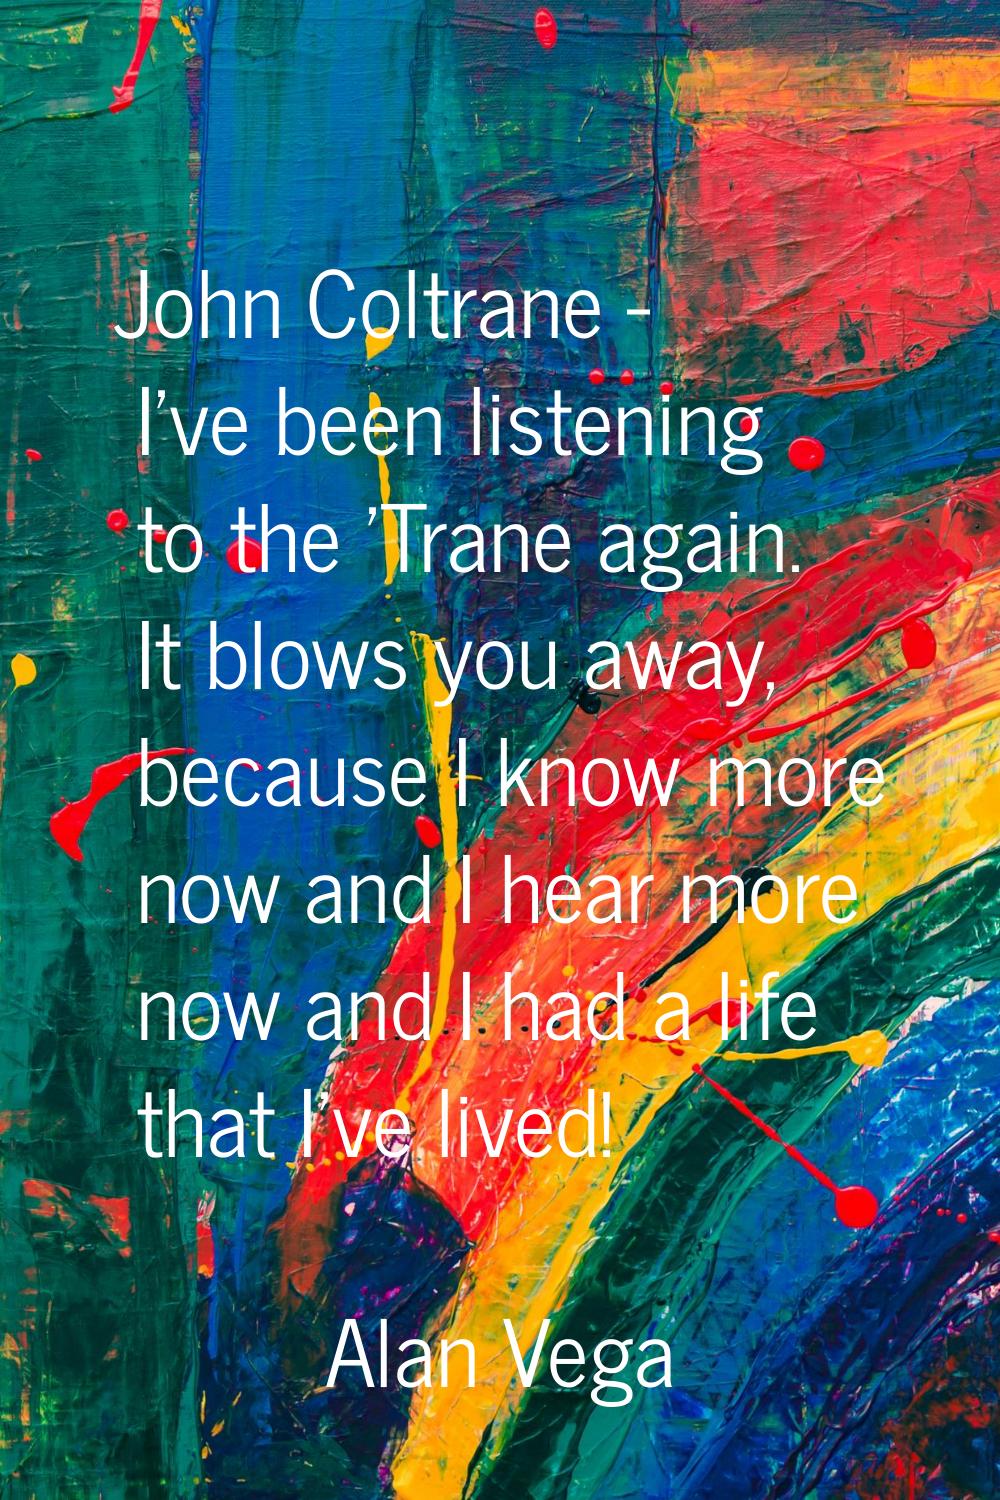 John Coltrane - I've been listening to the 'Trane again. It blows you away, because I know more now